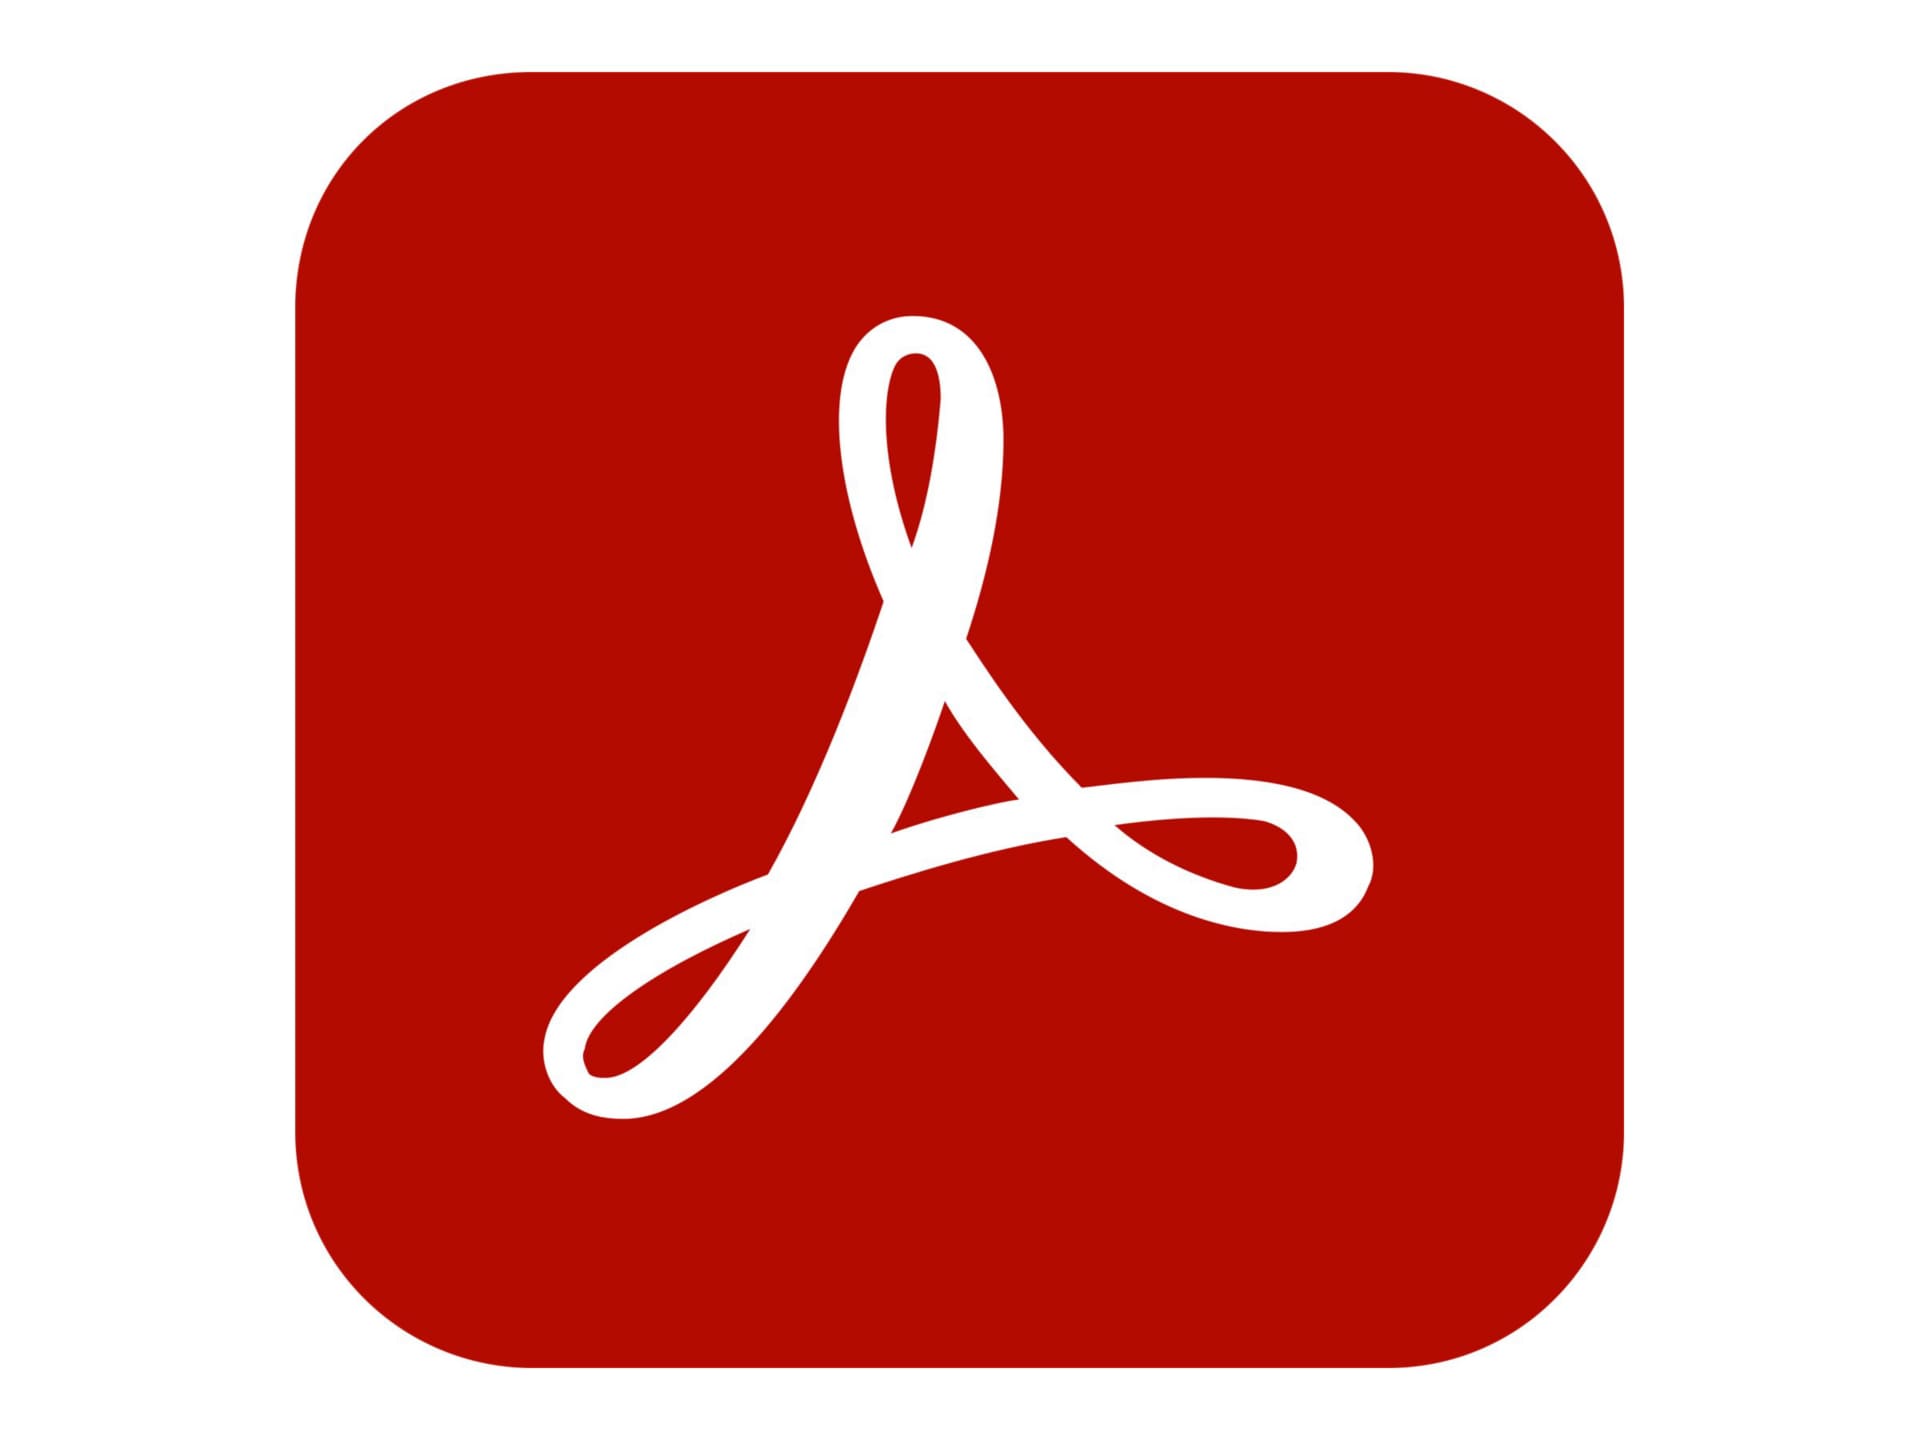 Adobe Acrobat Pro for teams - Subscription New (annual) - 1 user